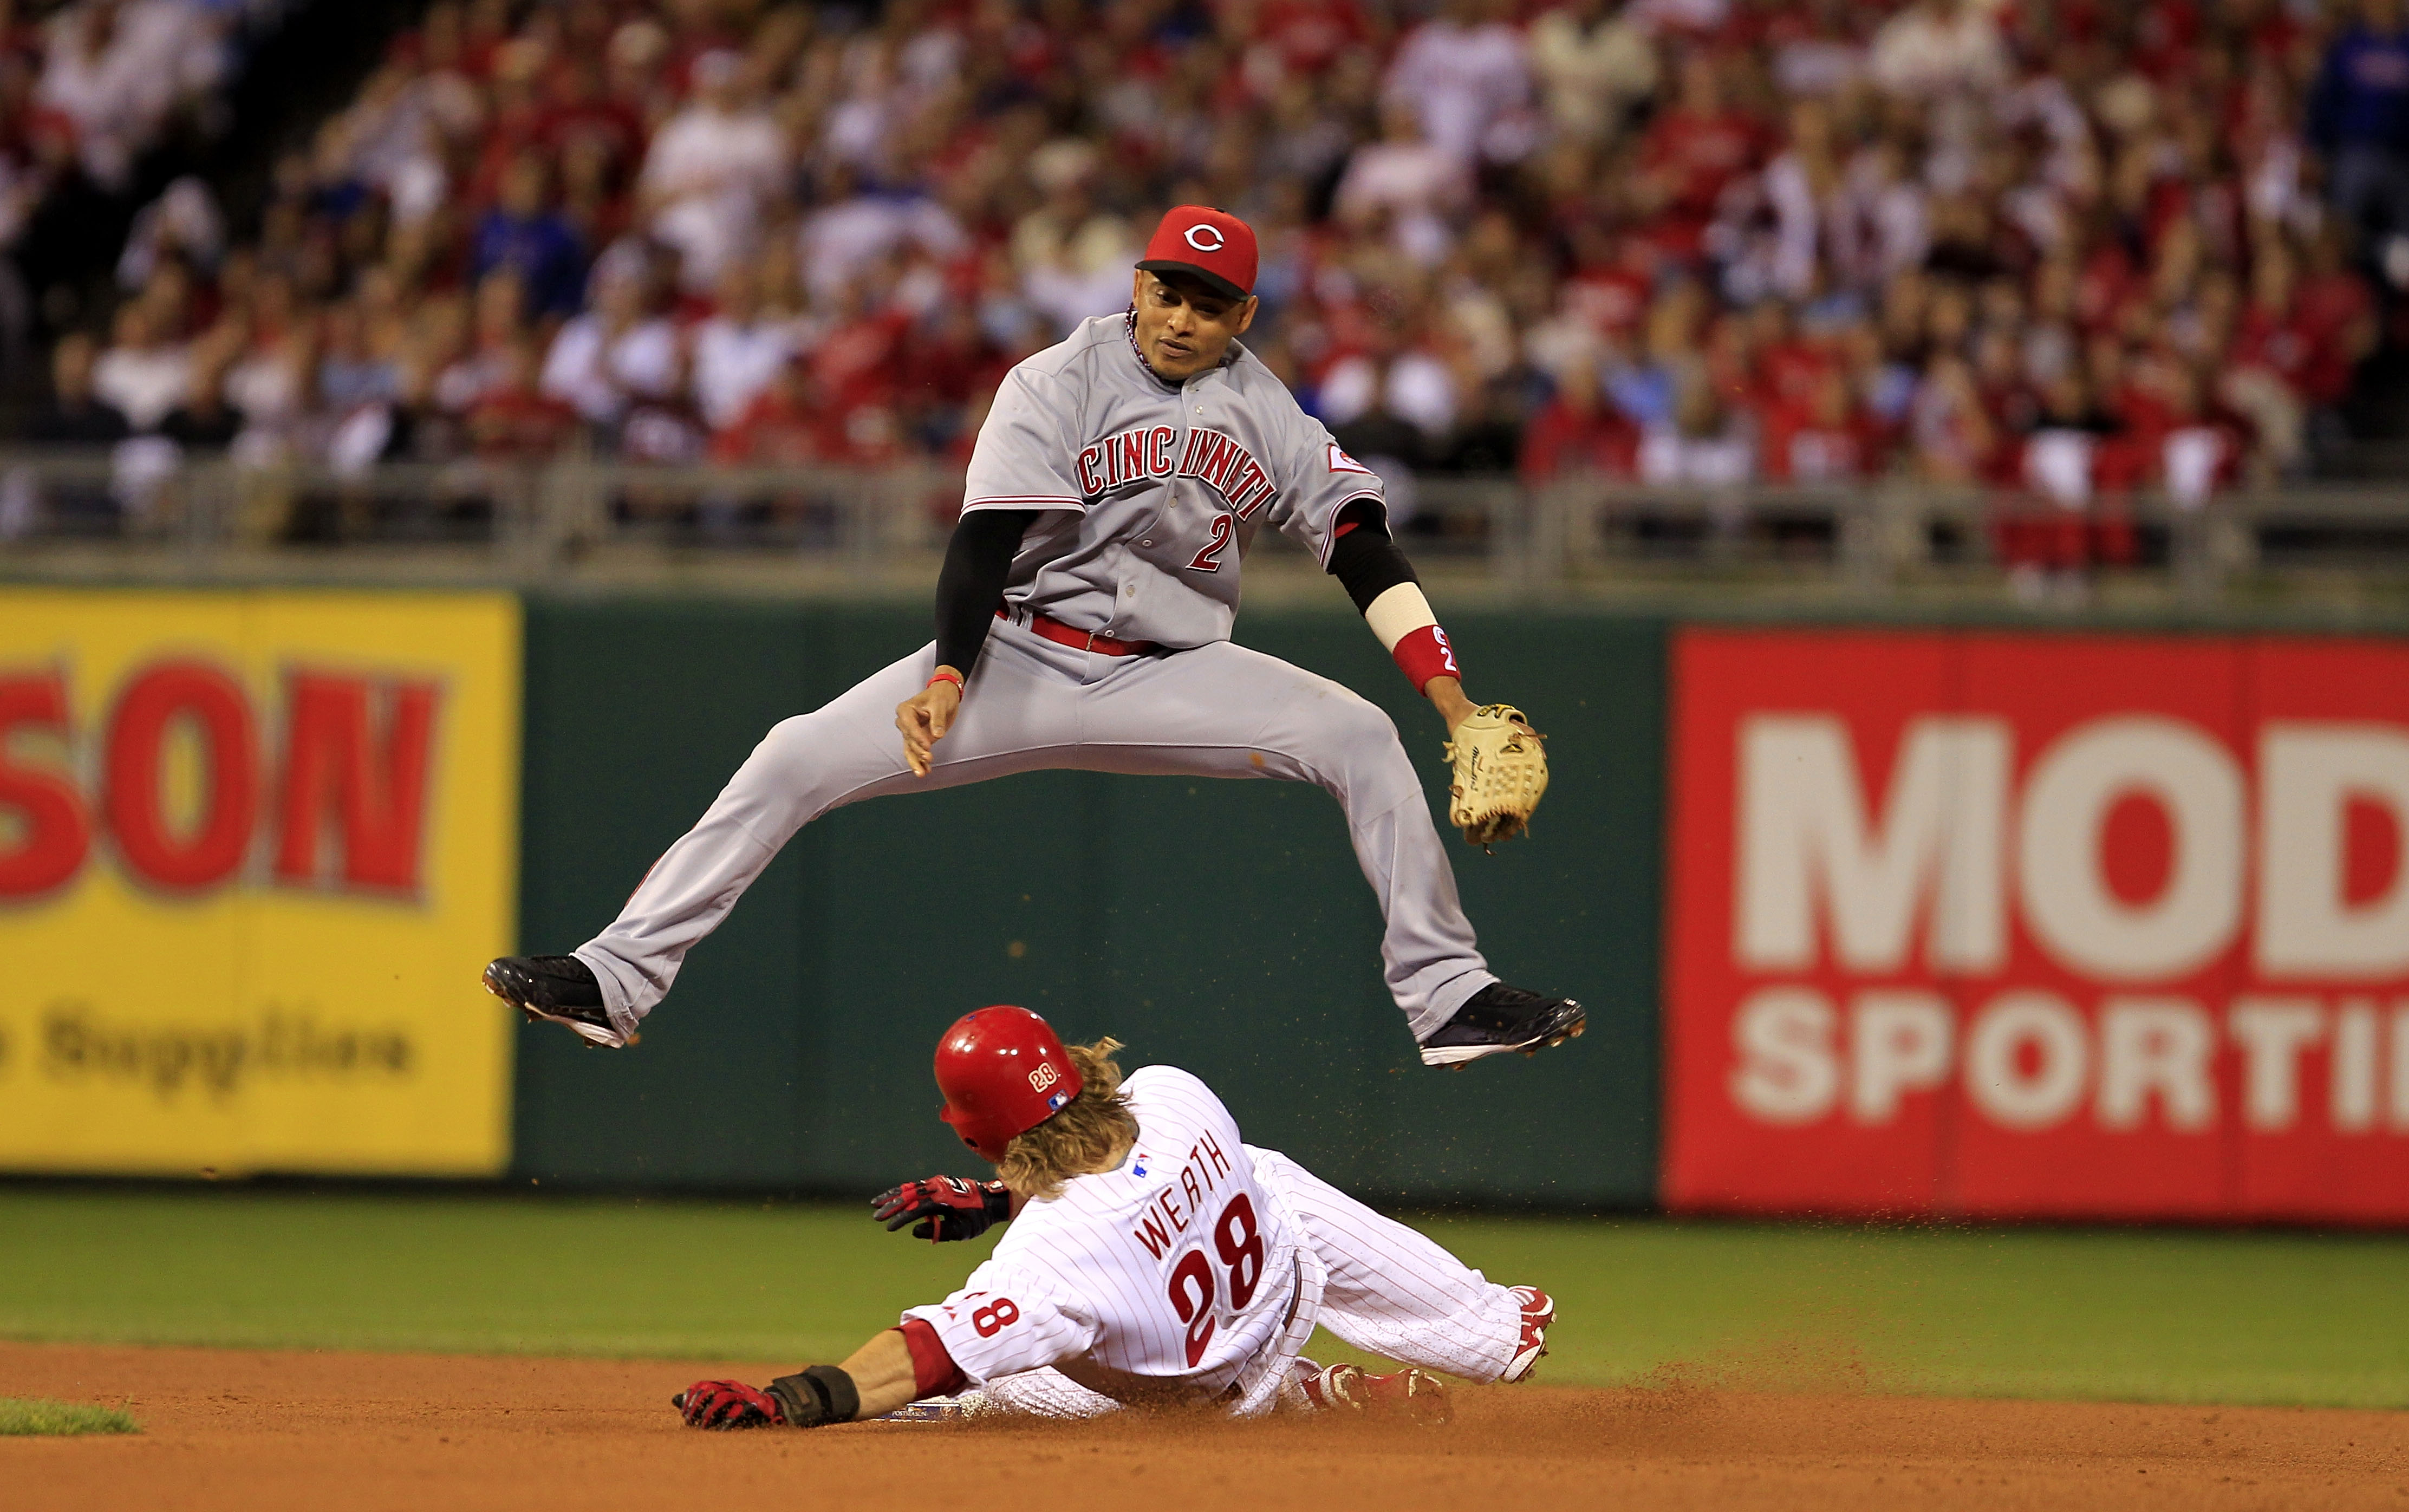 PHILADELPHIA - OCTOBER 08:  Orlando Cabrera #2 of the Cincinnati Reds leaps over Jayson Werth #28 of the Philadelphia Phillies as Werth steals second base during game 2 of the NLDS at Citizens Bank Park on October 8, 2010 in Philadelphia, Pennsylvania. Th